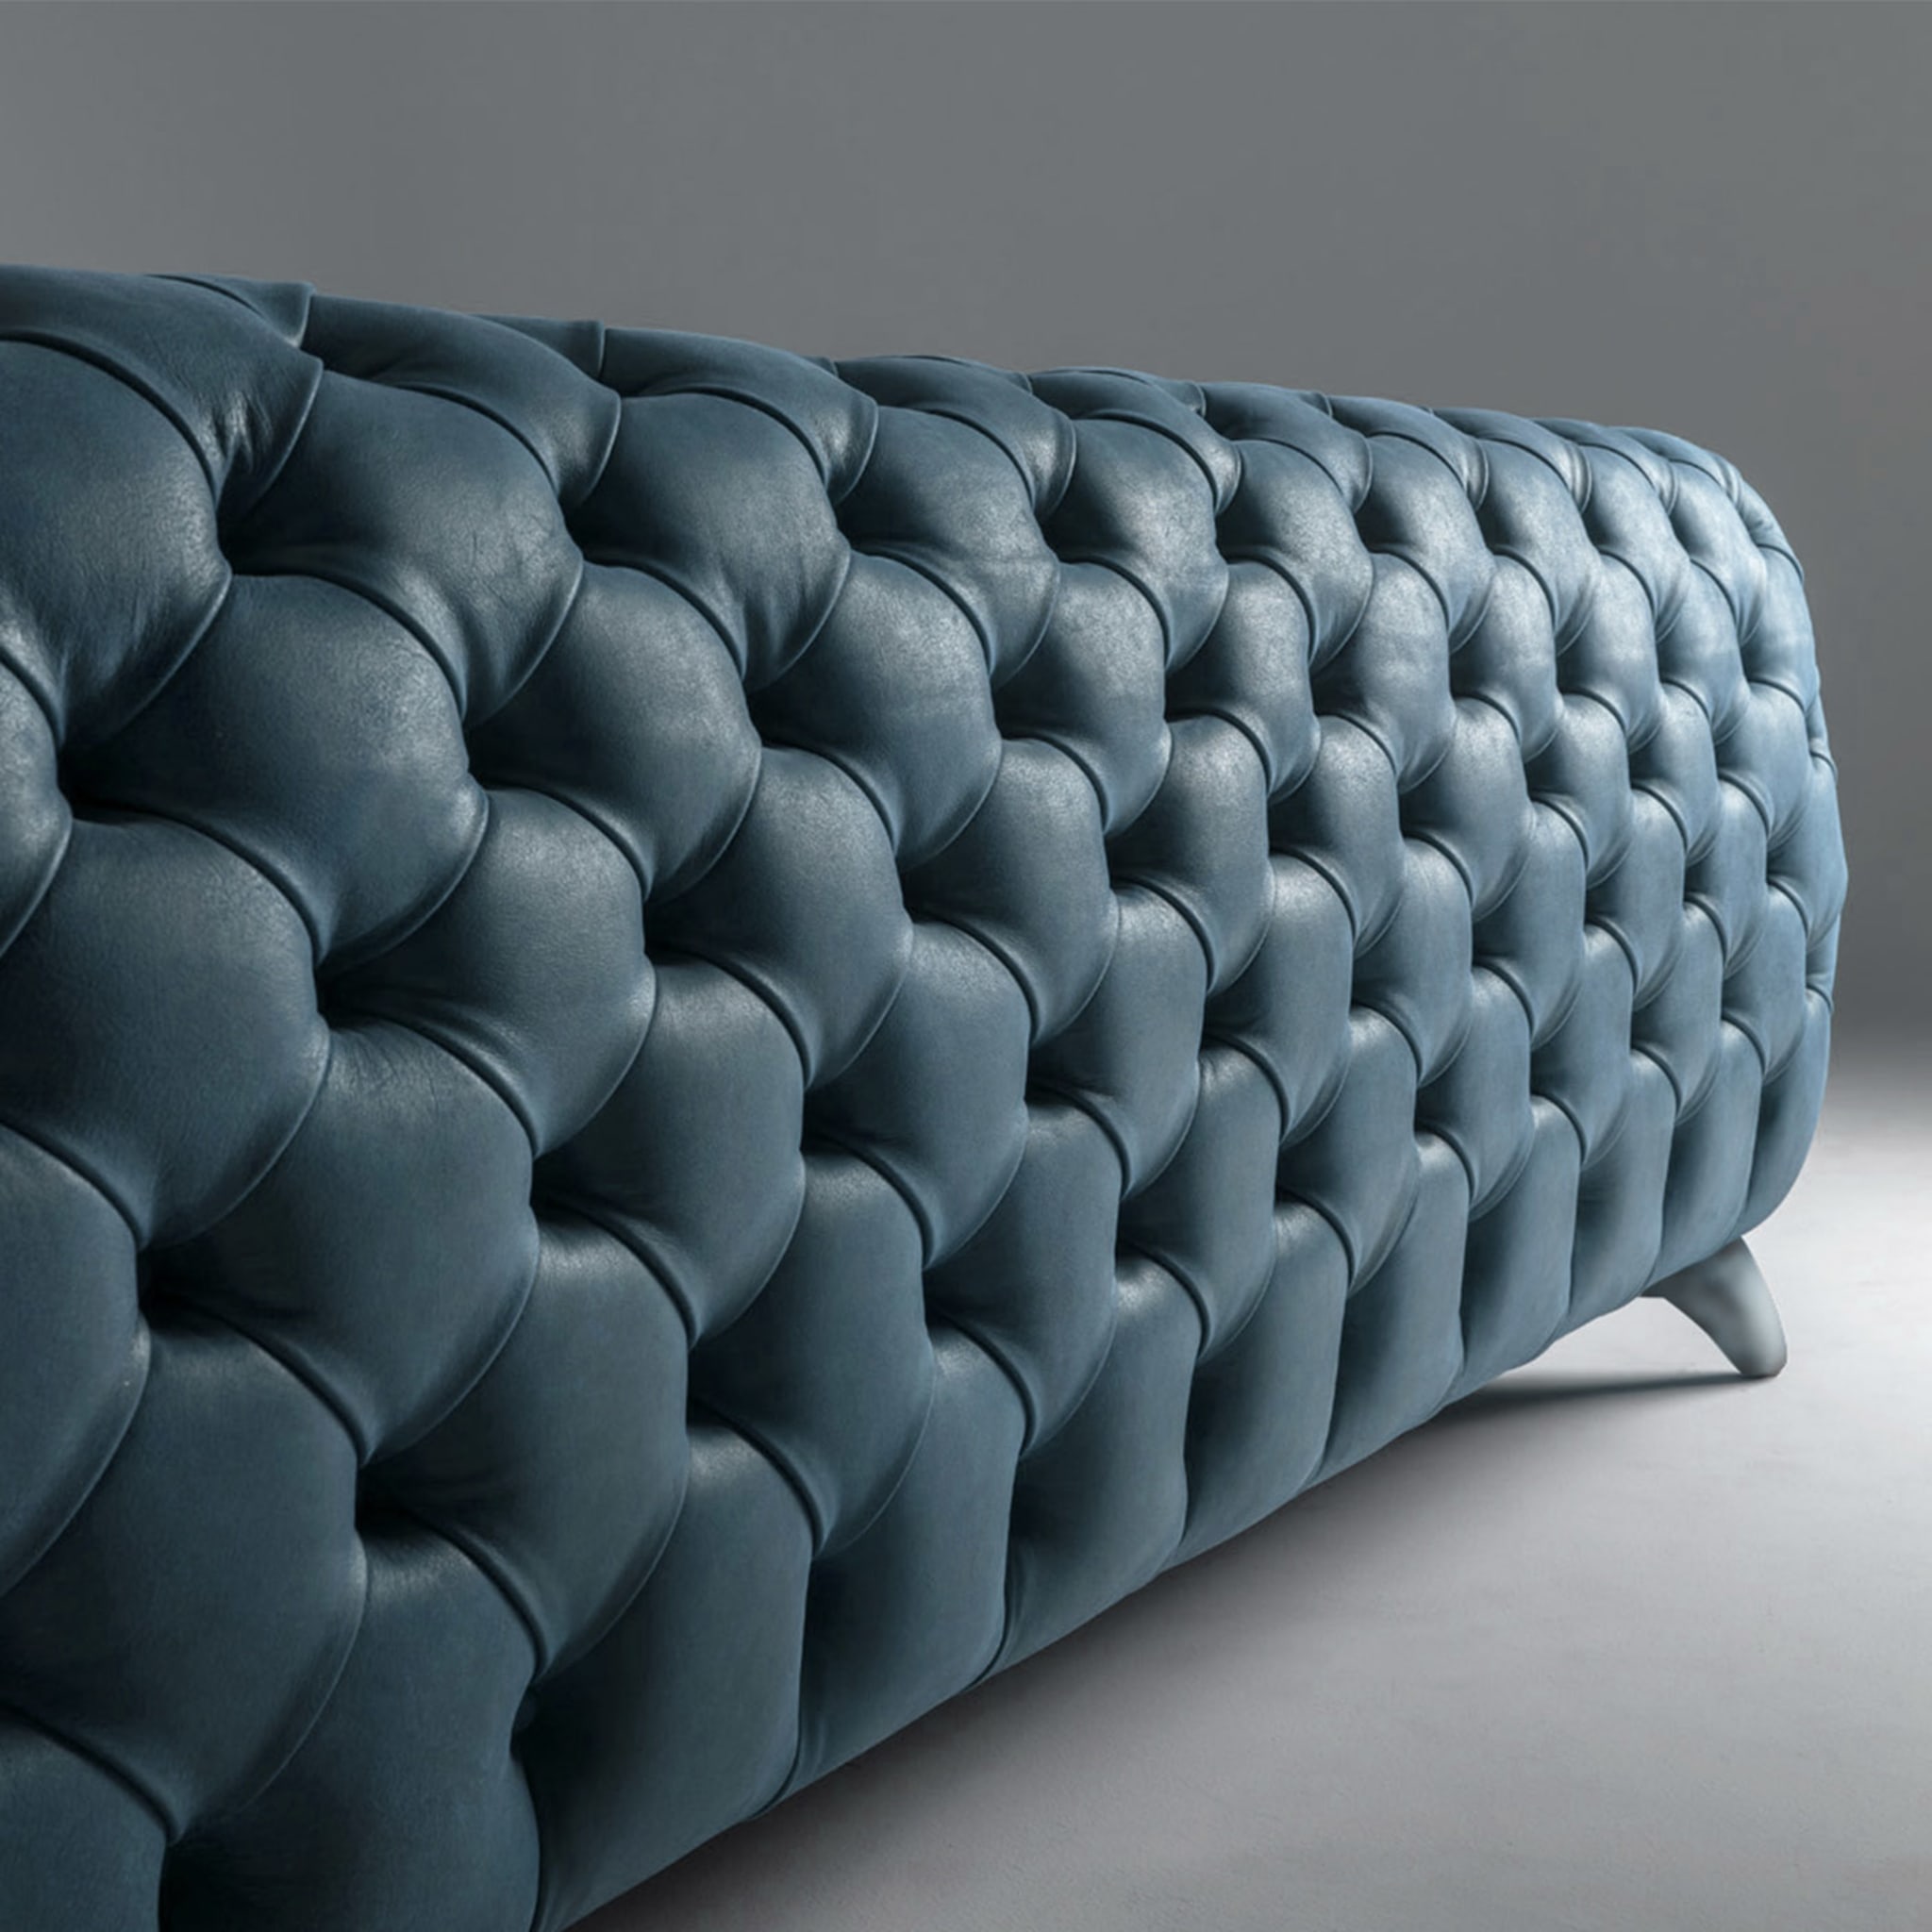 Isidoro Leather Sofa 3 Seats by Marco and Giulio Mantellassi - Alternative view 2